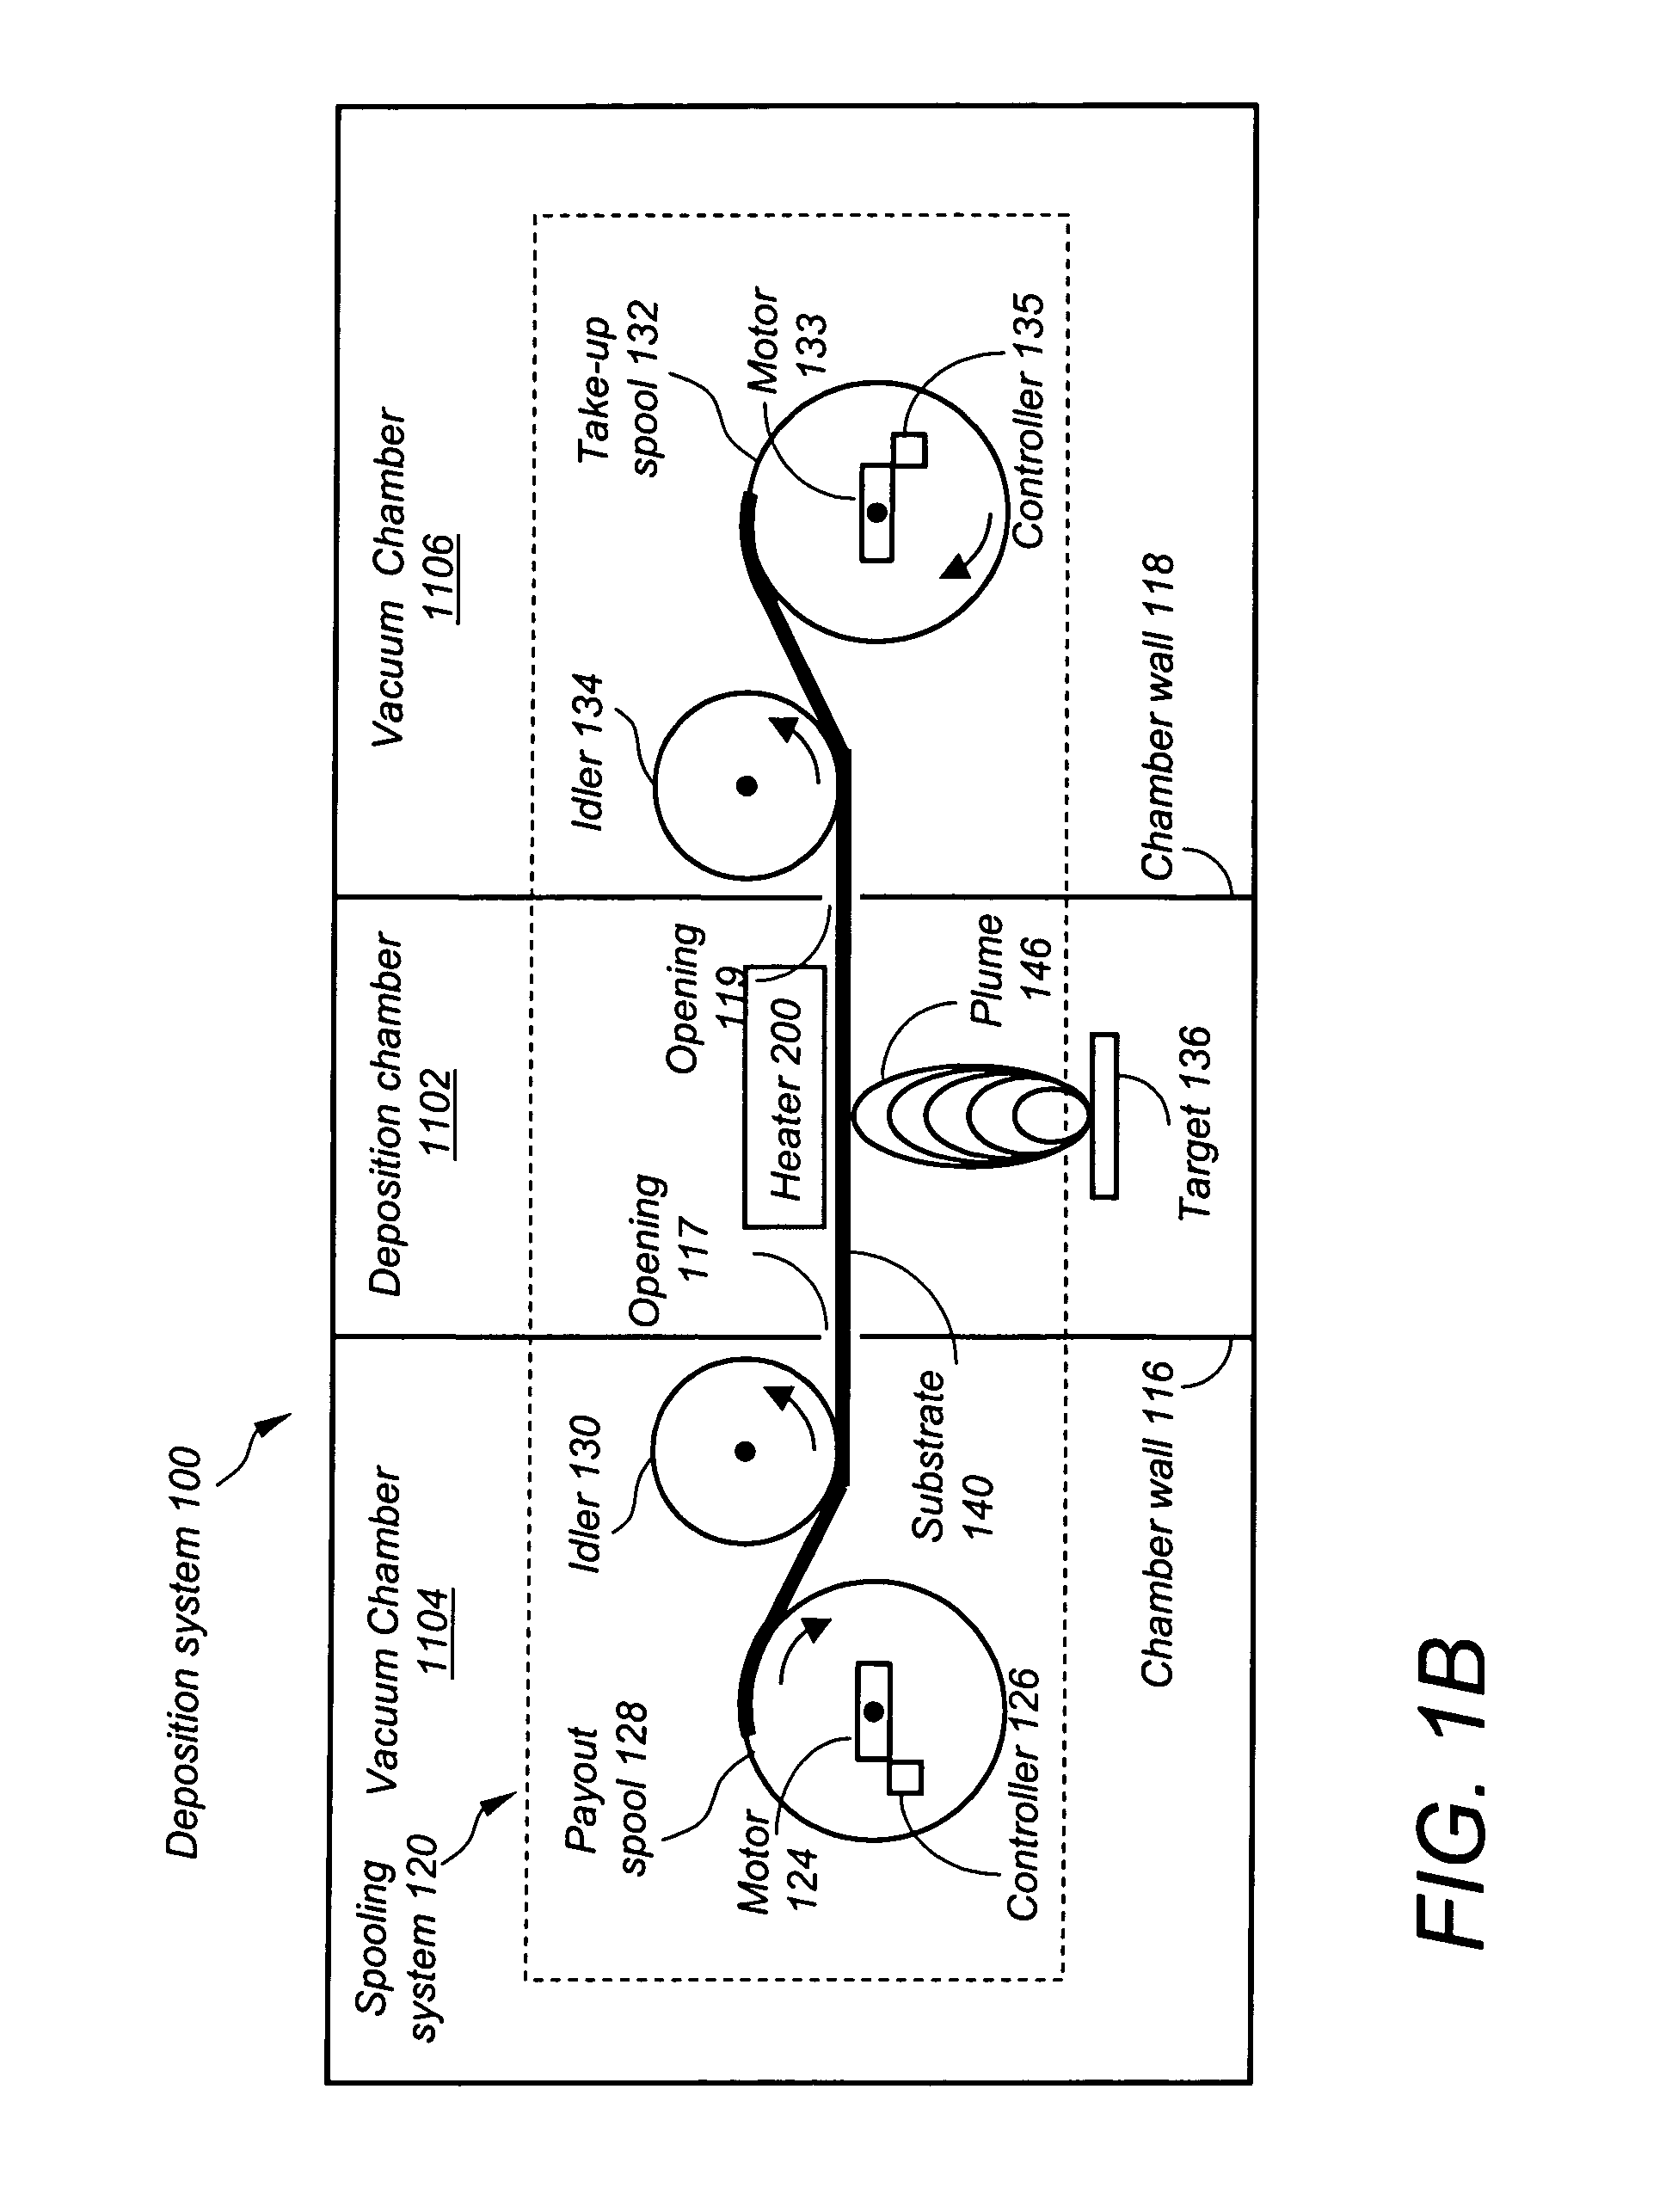 High throughput continuous pulsed laser deposition process and apparatus